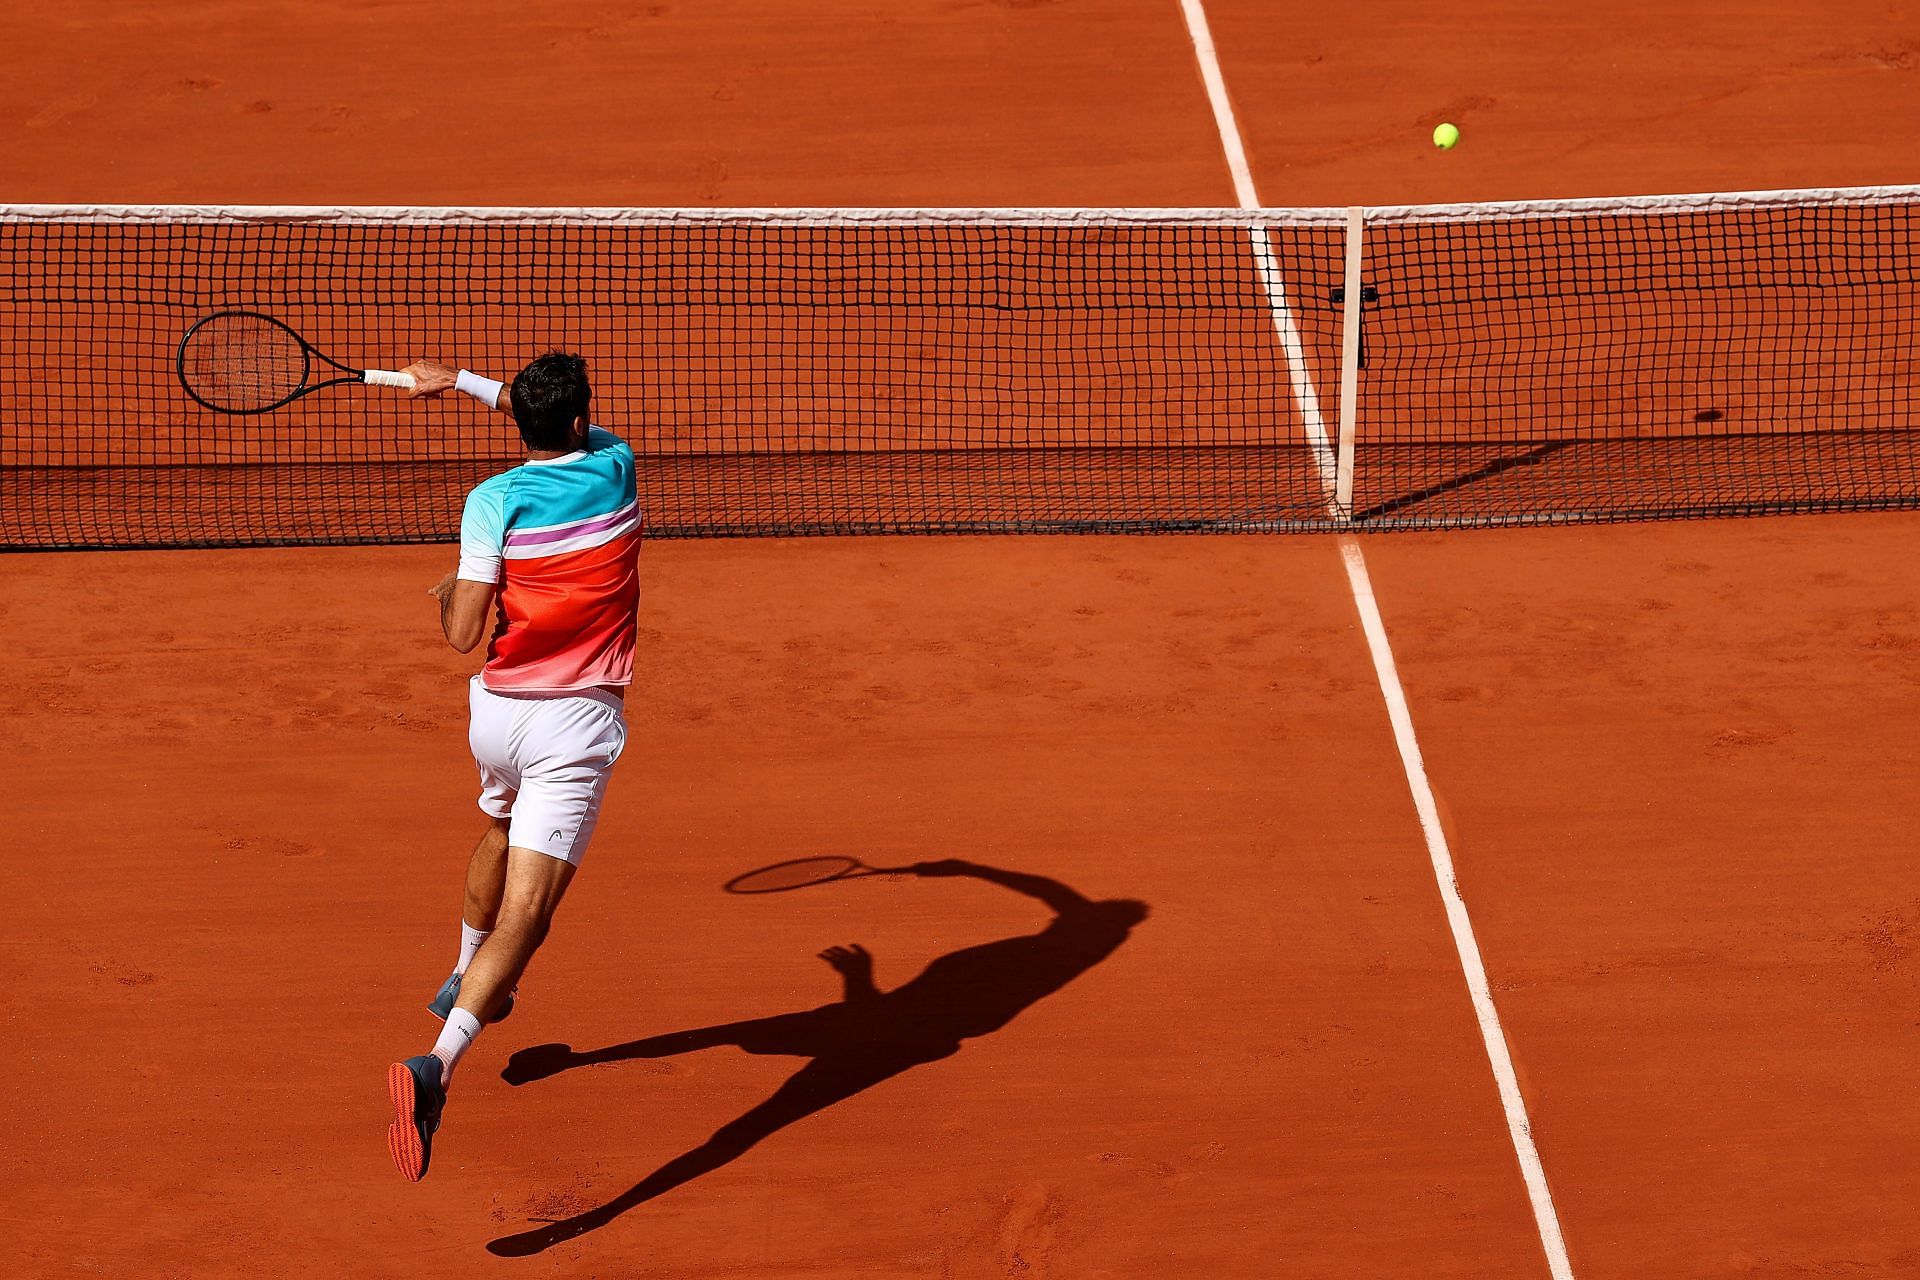 Marin Cilic plays a forehand at the French Open